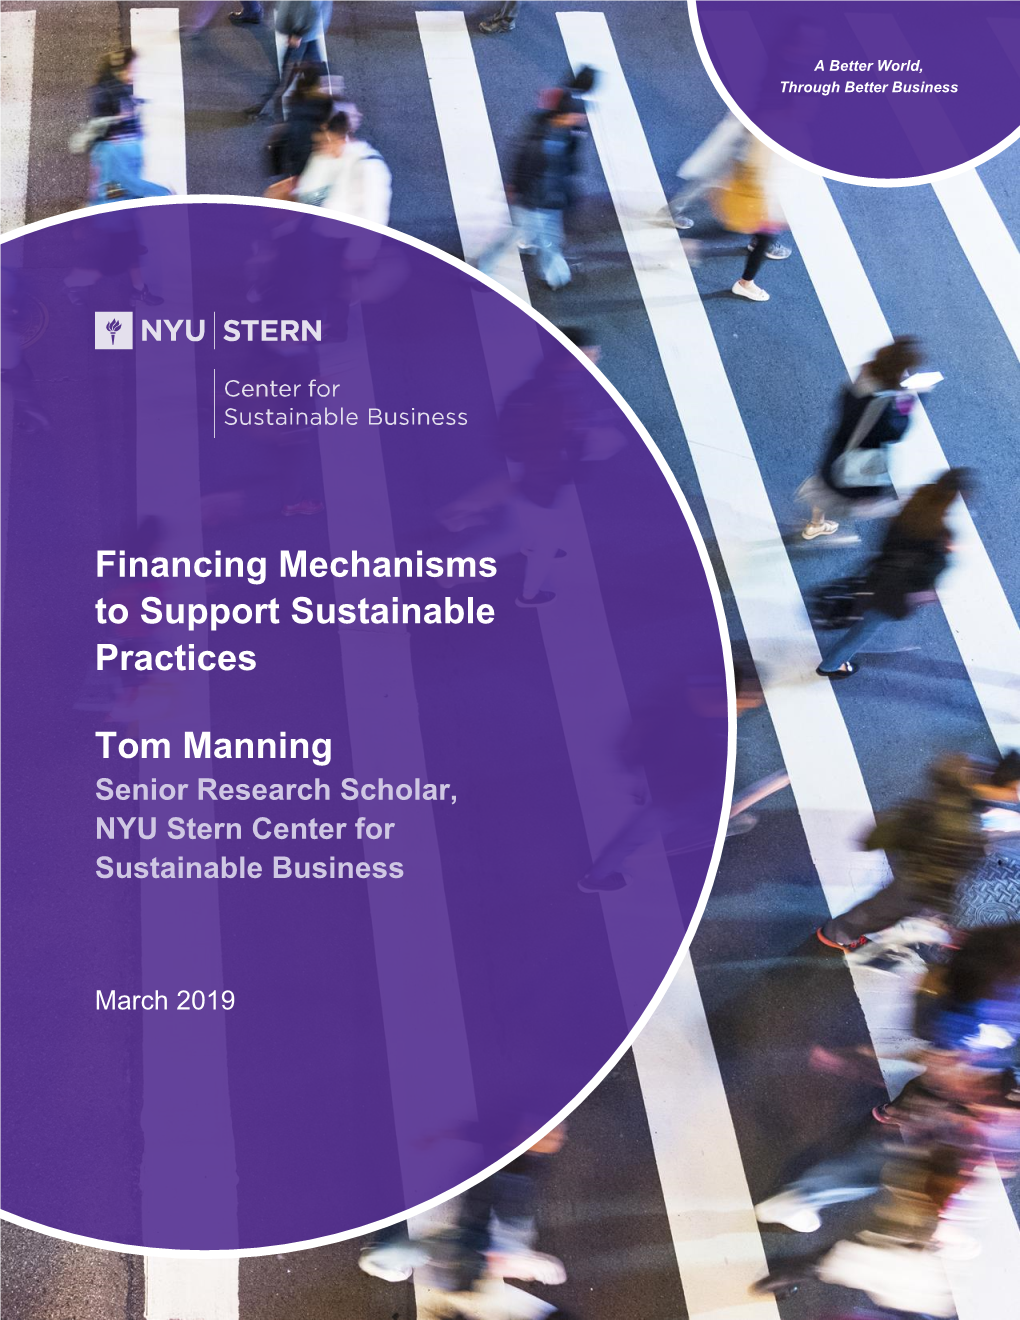 Financing Mechanisms to Support Sustainable Practices